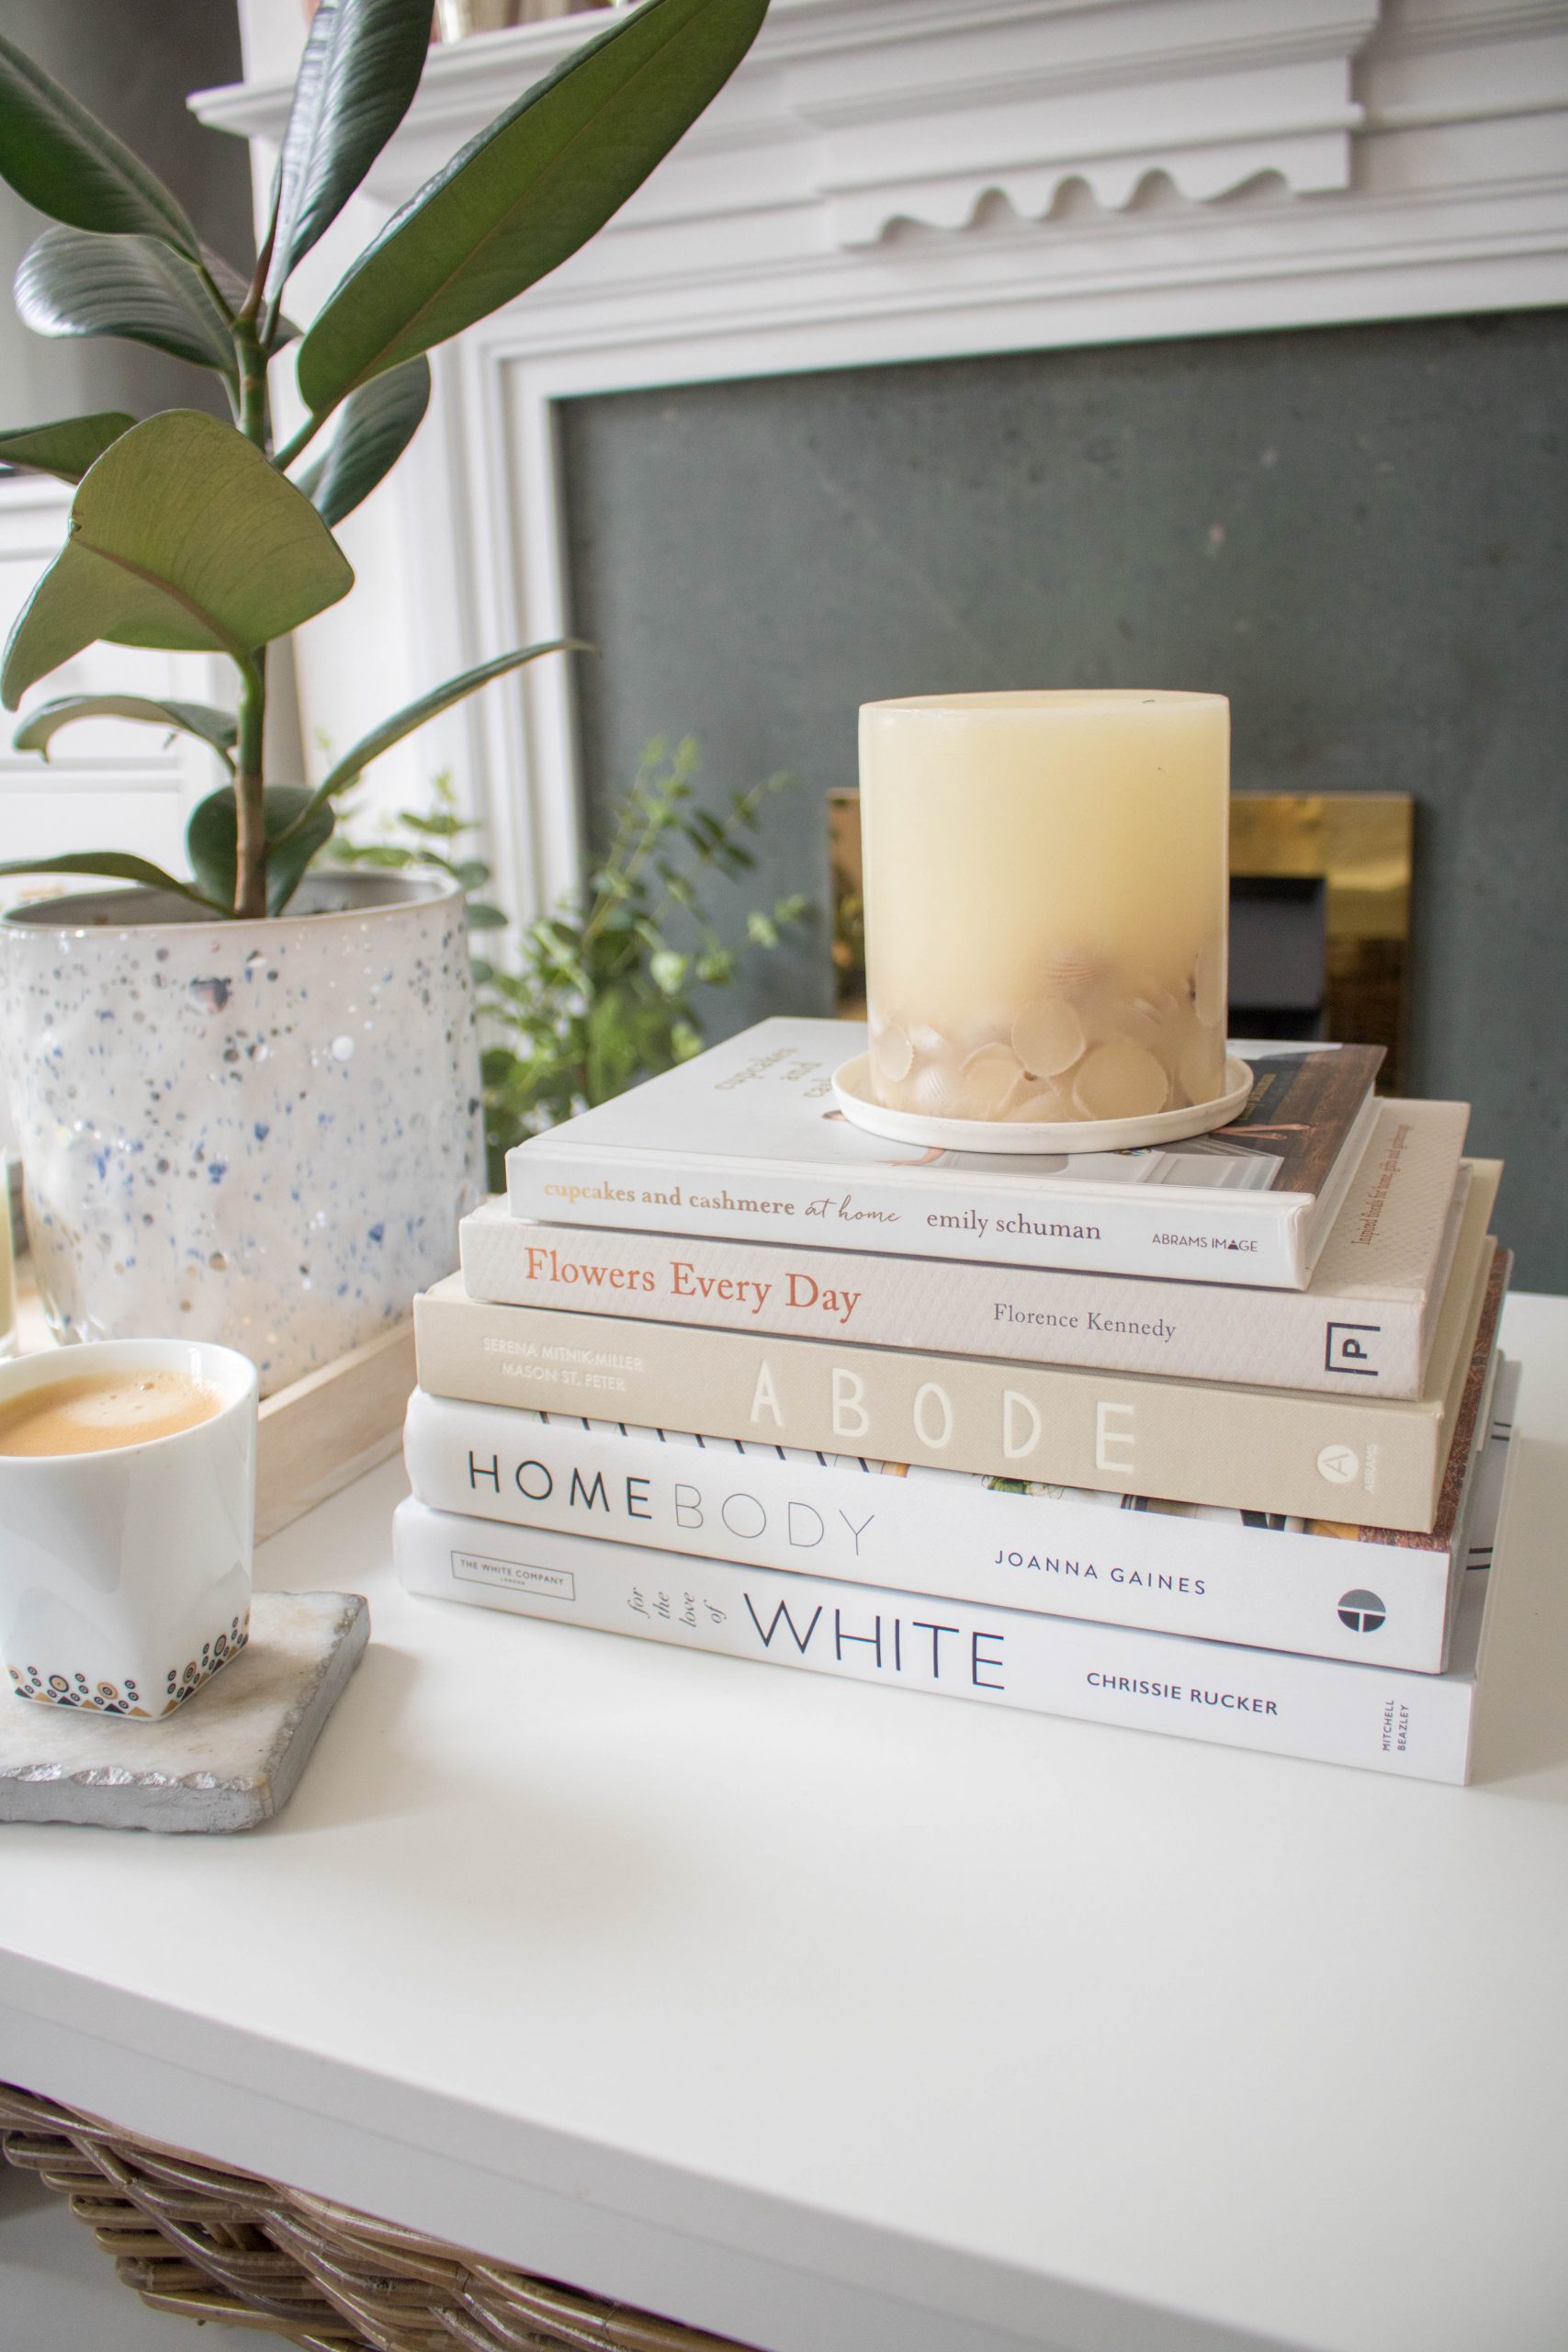 My Must Have Recommended Coffee Table Books - An Edited Lifestyle